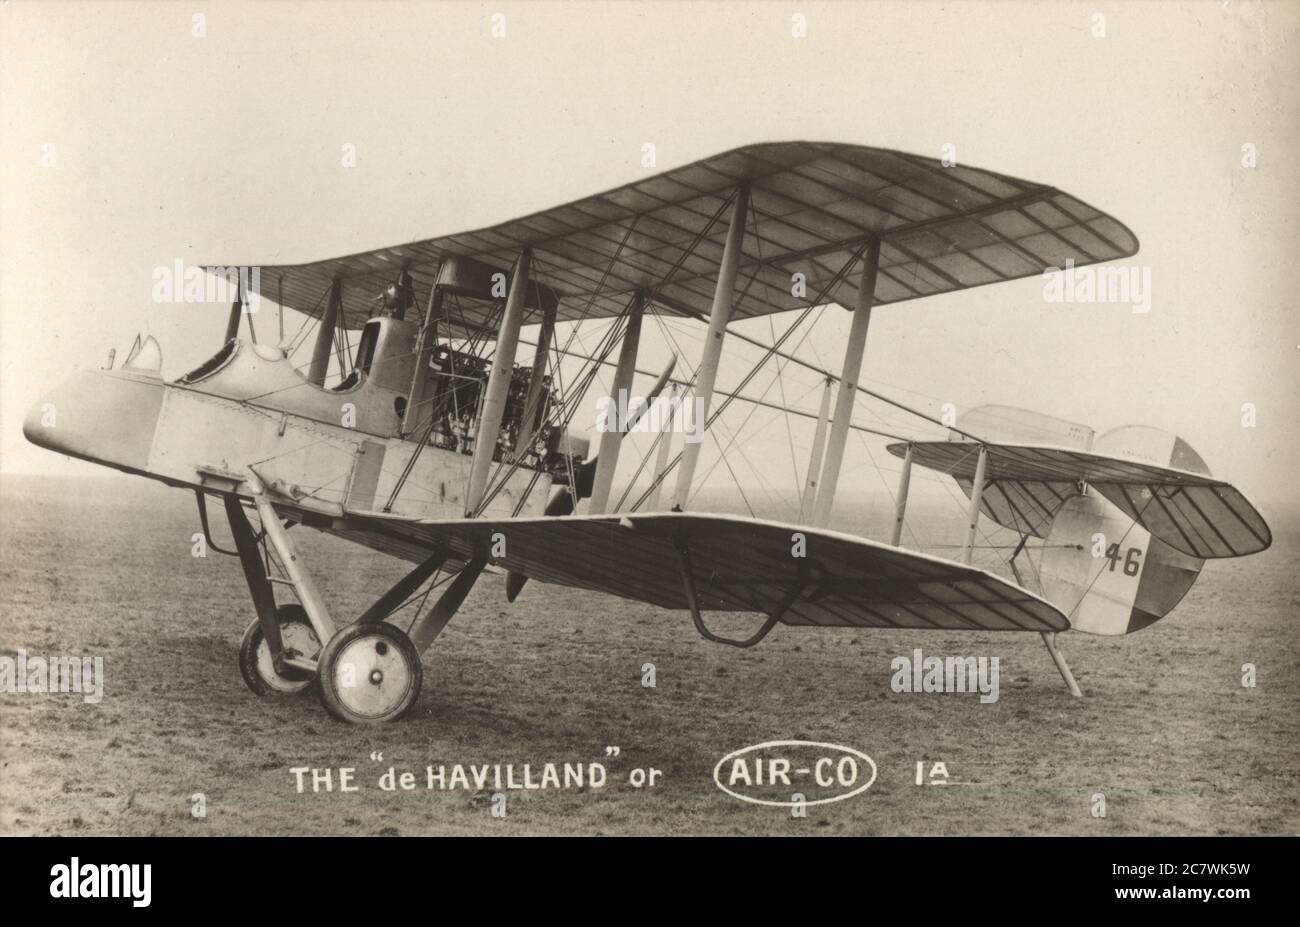 The de Havilland / AIRCO DH.1A two seater pusher biplane designed and built by The Aircraft Manufacturing Co. Ltd., Hendon, London, N.W.9.  – Engine 120 h.p. Beardmore. Speed 89 m.p.h. (Ground Level). Climb to 3,500ft., 6.45 minutes. This machine was practically identical with the Airco 1, except that it was fitted with a more powerful engine, an improved performance thereby being obtained. This type was in production 1915-1916. Stock Photo